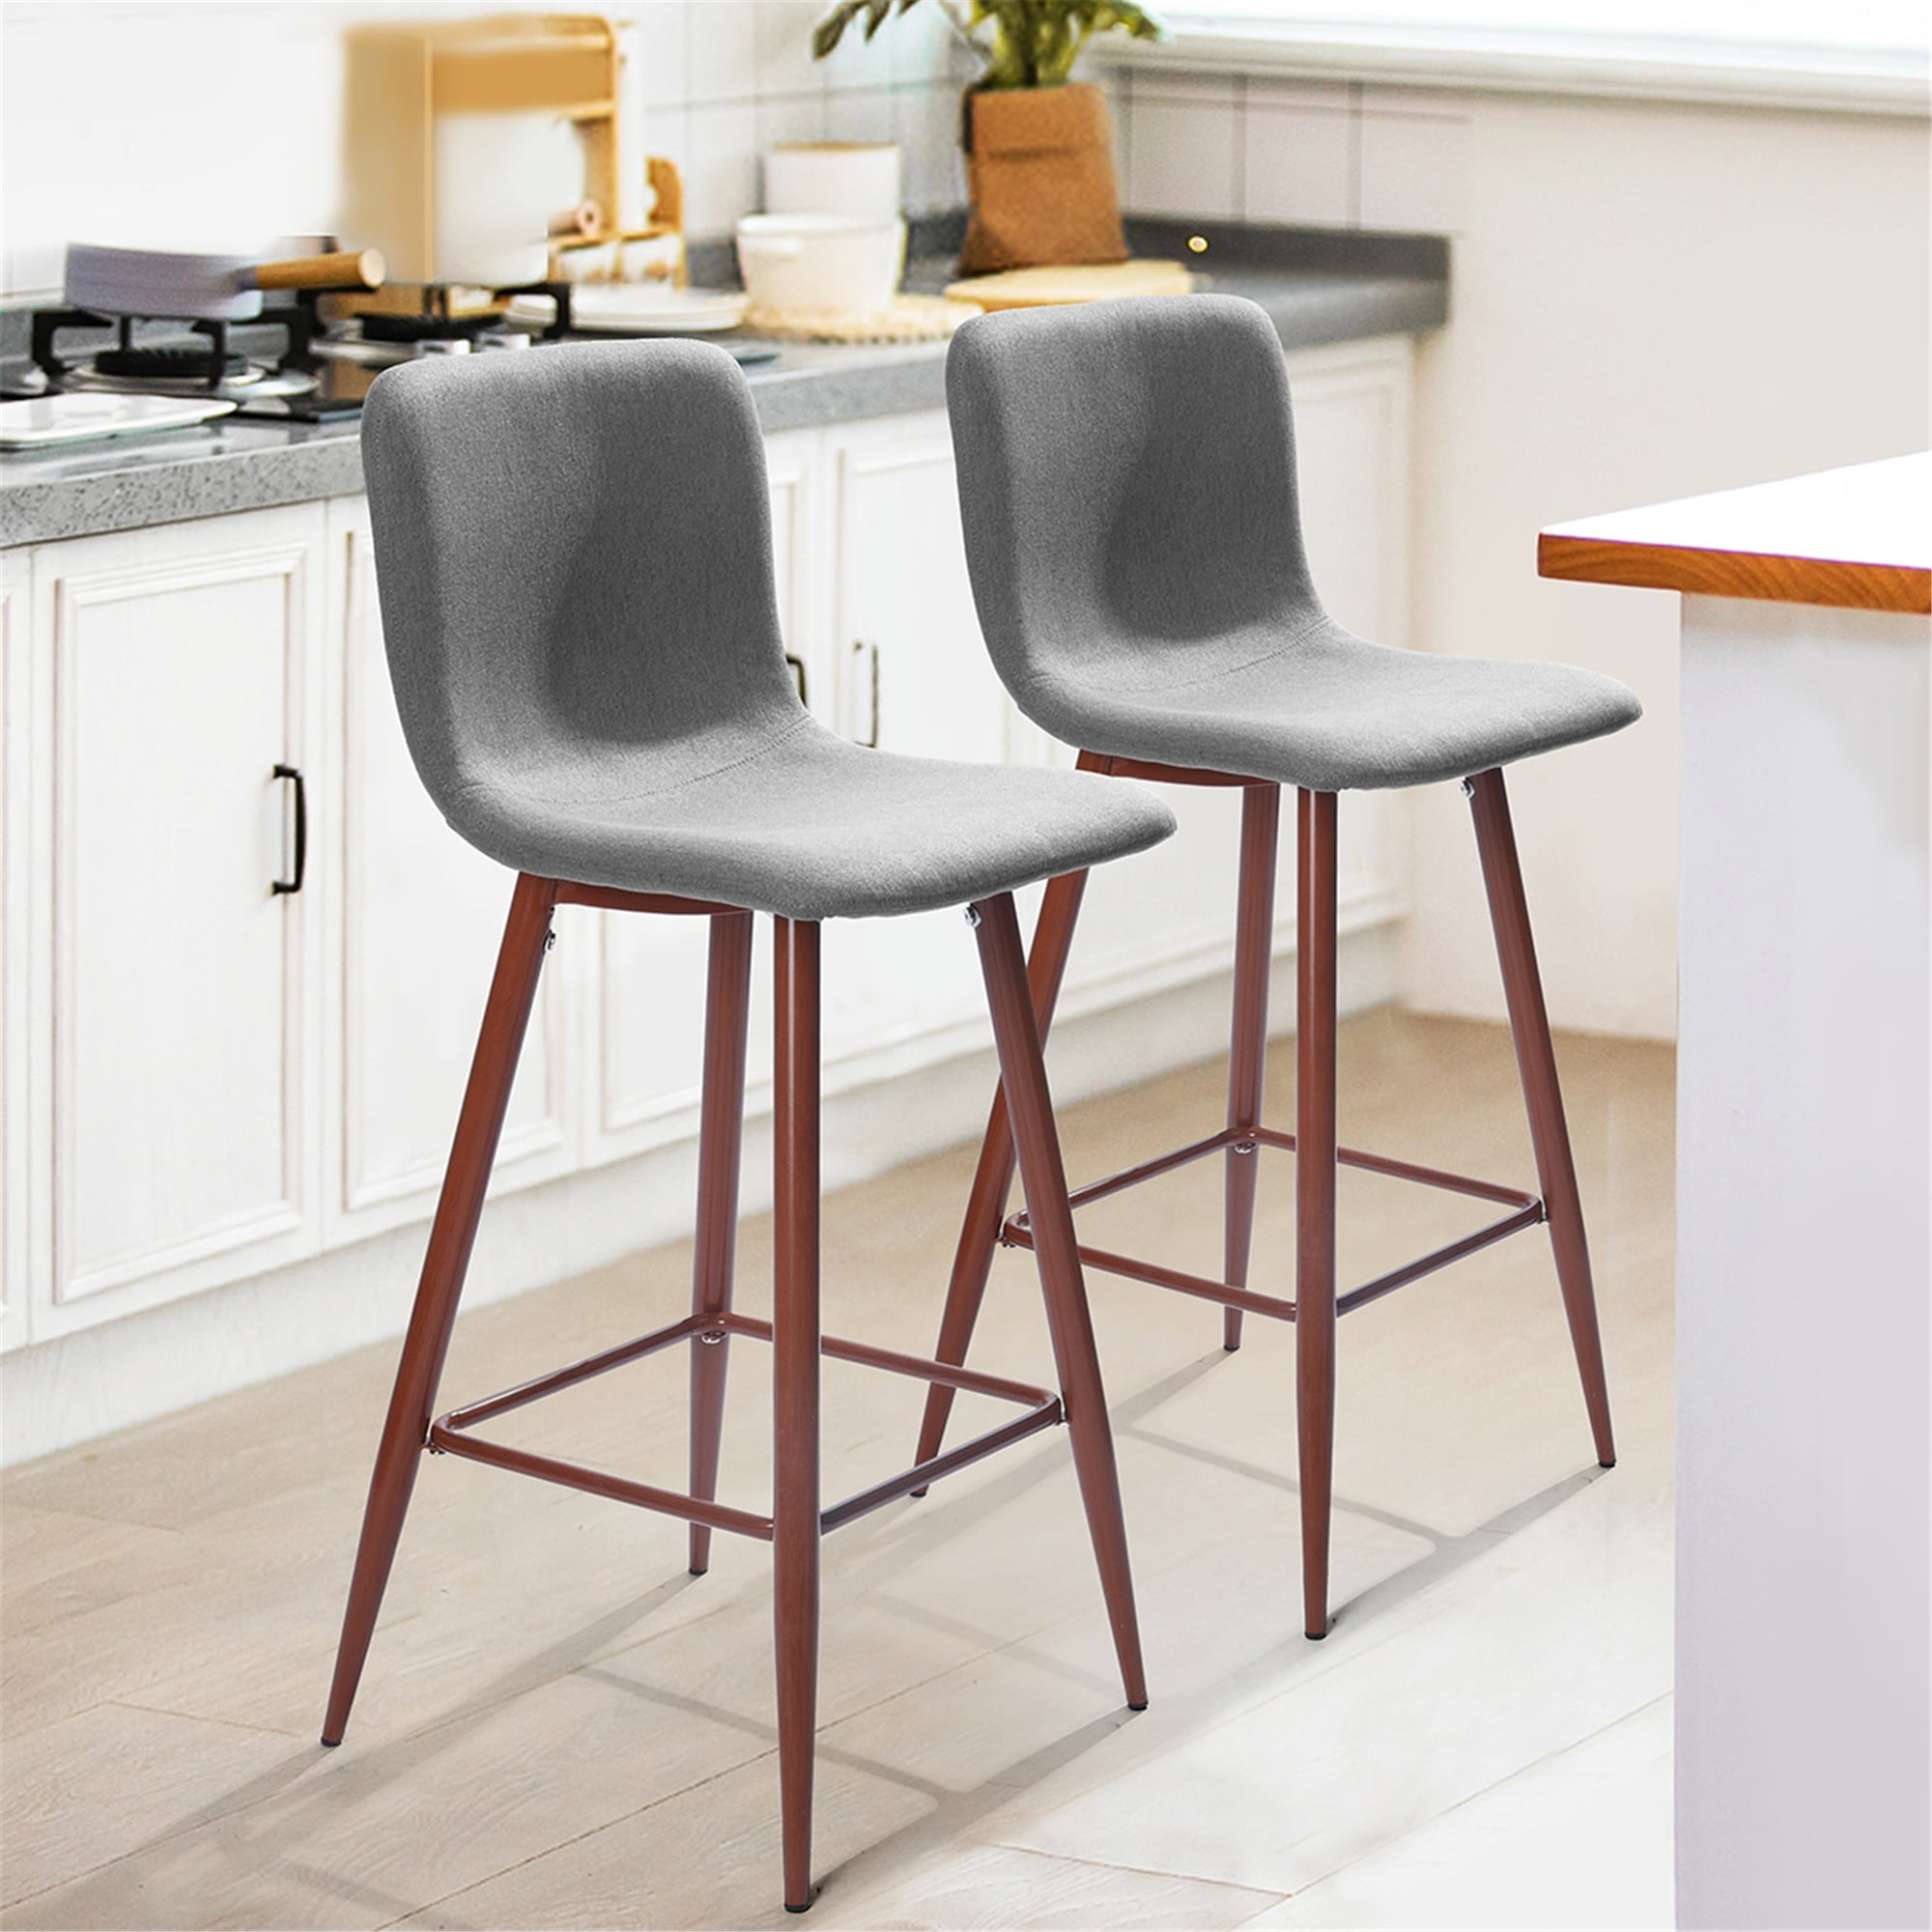 Furniturer Contemporary 29 Height, Multi Colored Bar Stools